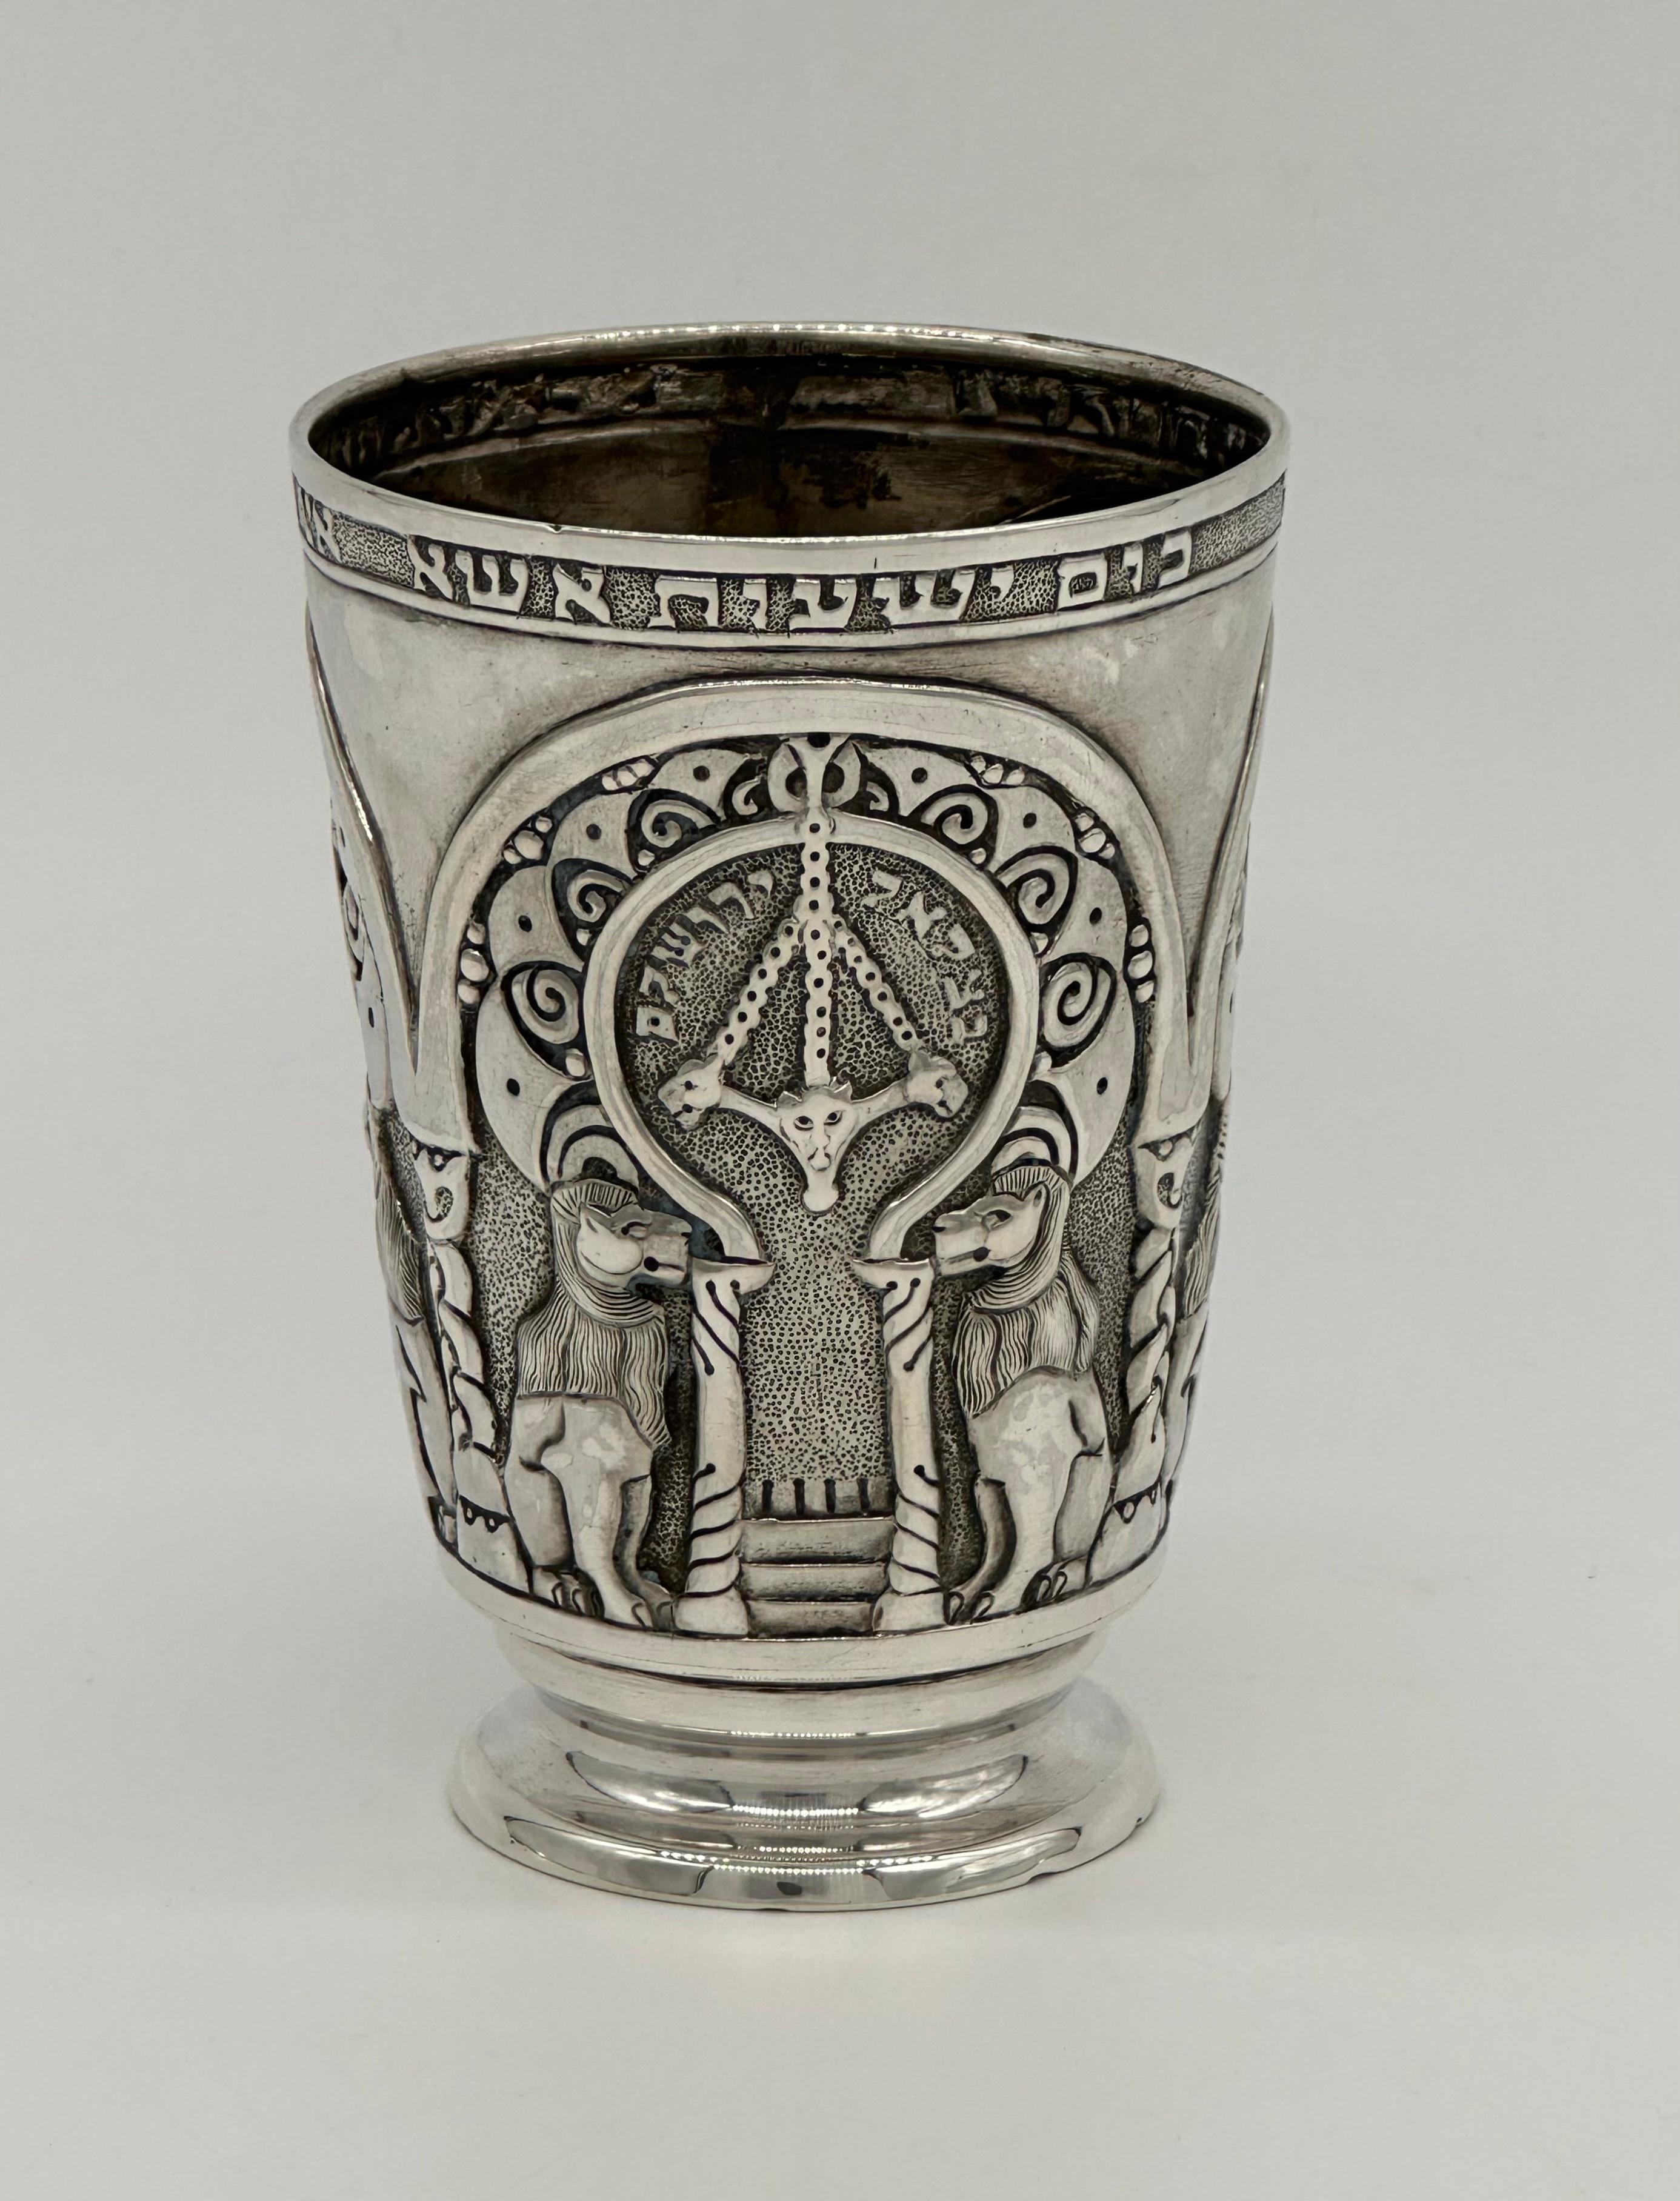 Important Handmade sterling silver Kiddush goblet by Bezalel School, Jerusalem, Circa 1910-1913. 
On the cup there are 3 identical scenes of flanked lions and on the middle of them There are two columns with a staircase, this design is probably